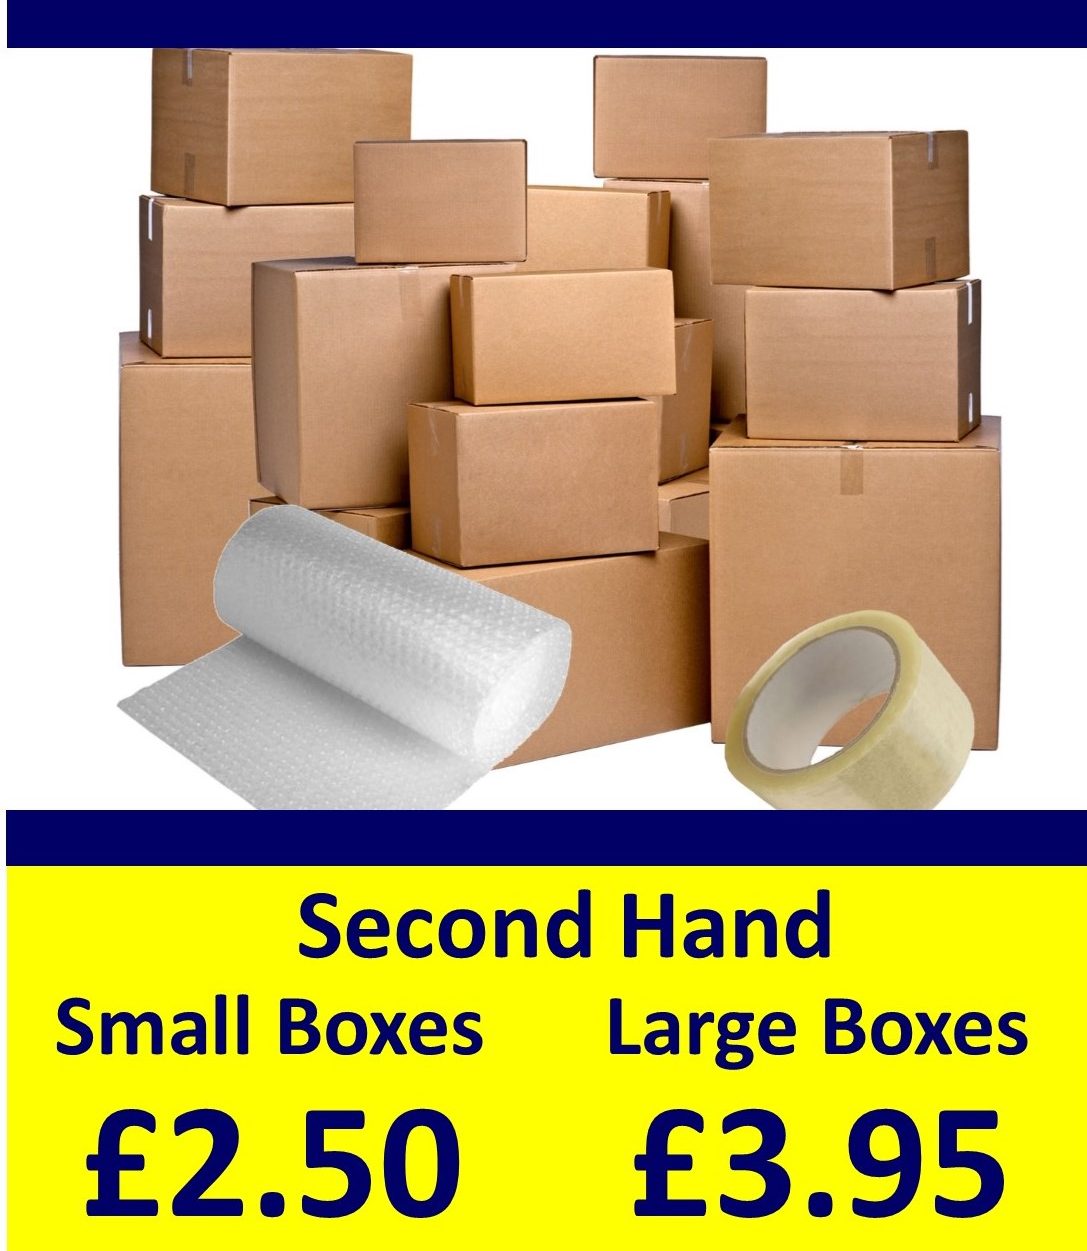 Home-Office-Poster-5-Large-and-Small-Boxes-Portrait.jpg